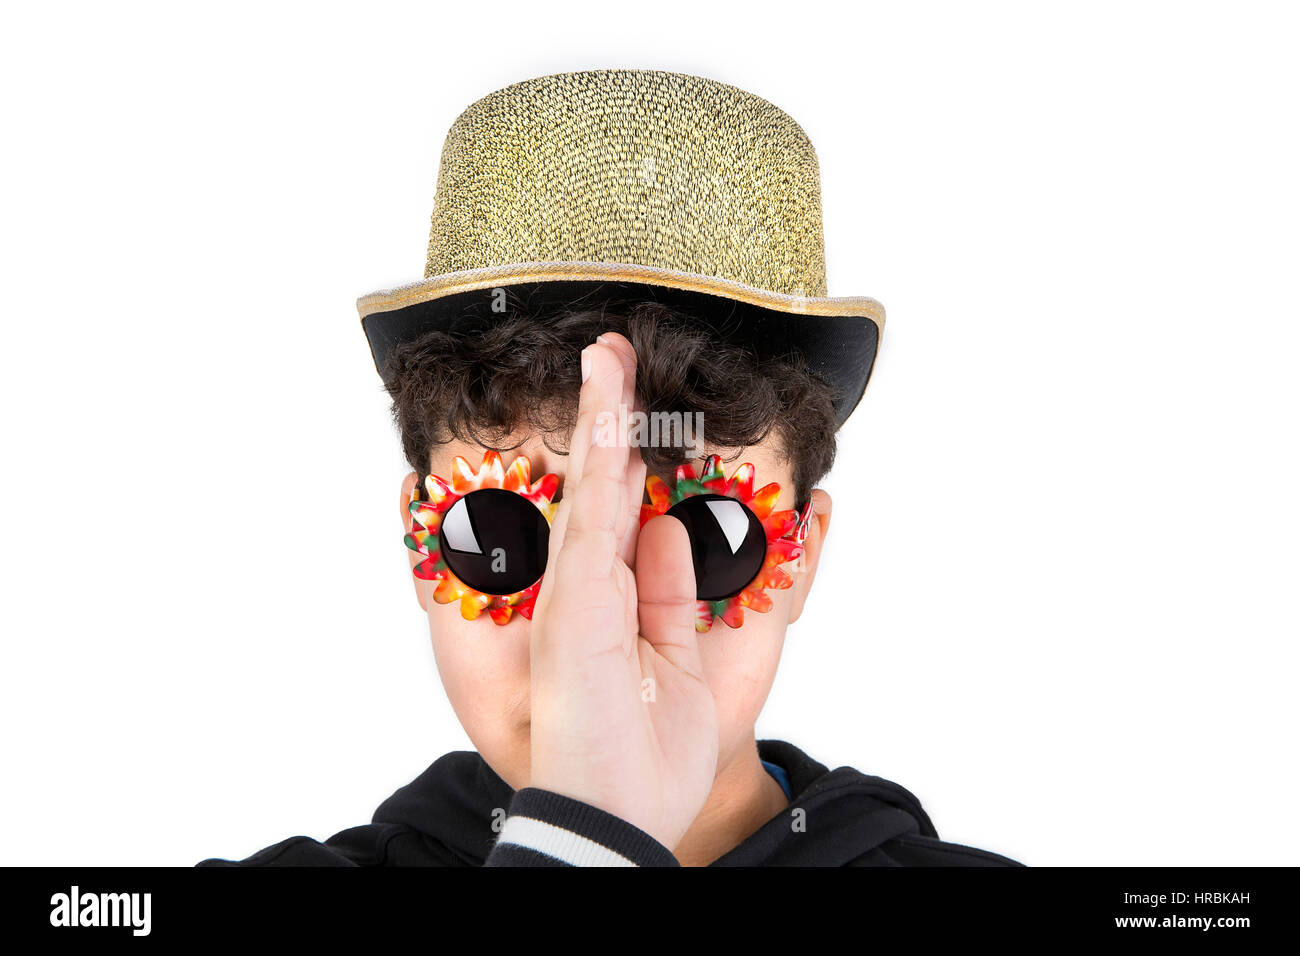 Boy wearing hat and sunglasses in studio setting. Stock Photo